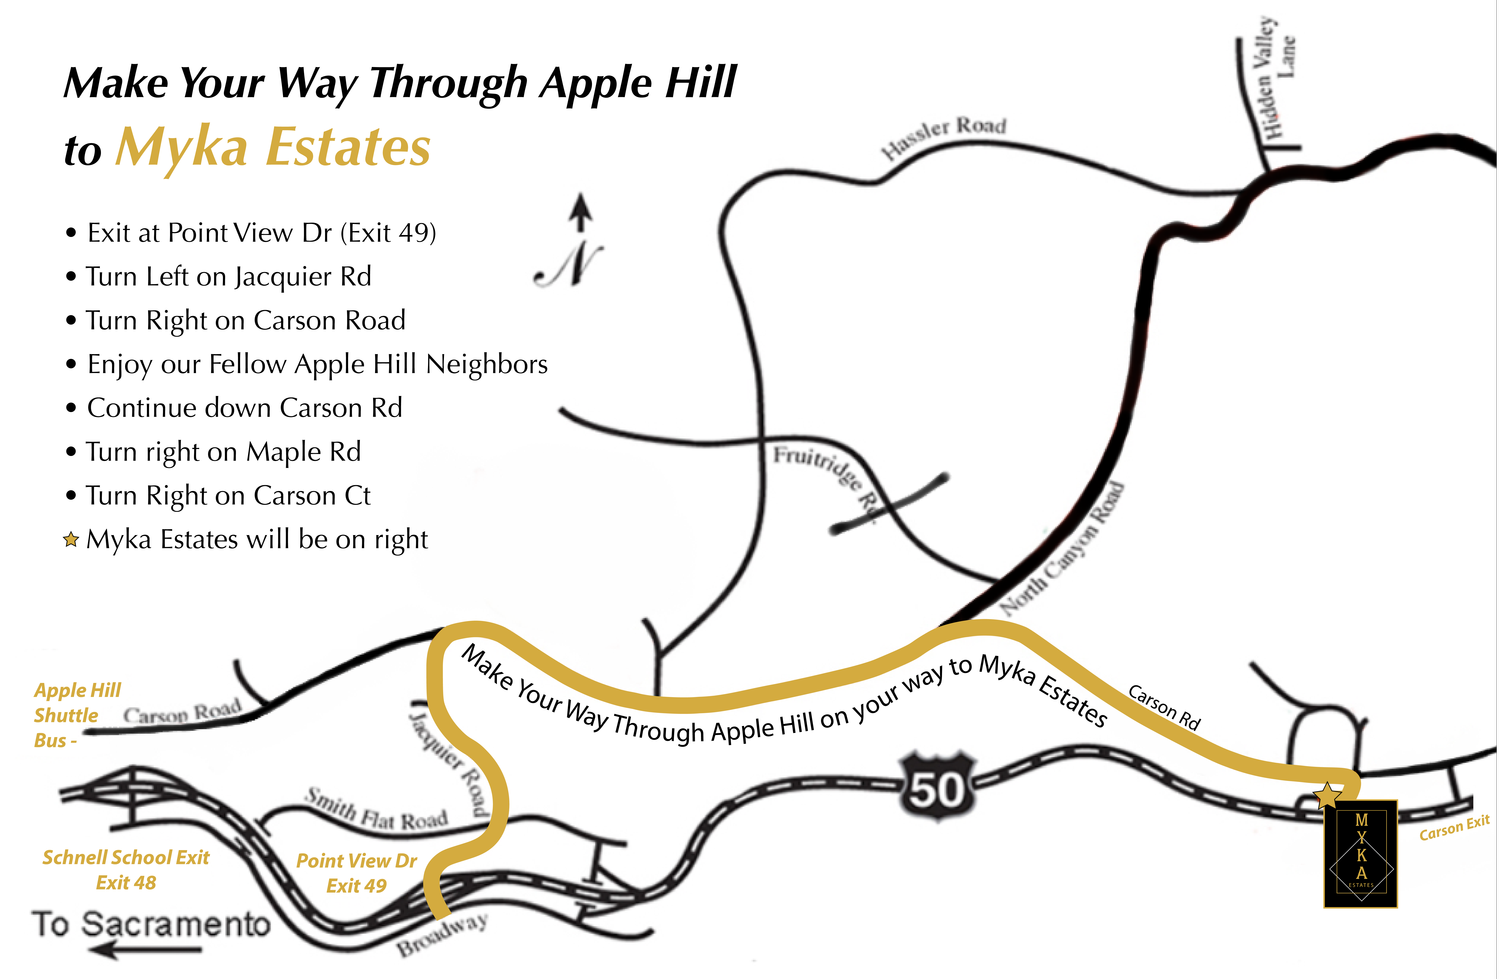 Driving directions to Myka Estates Tasting Room in Apple Hill